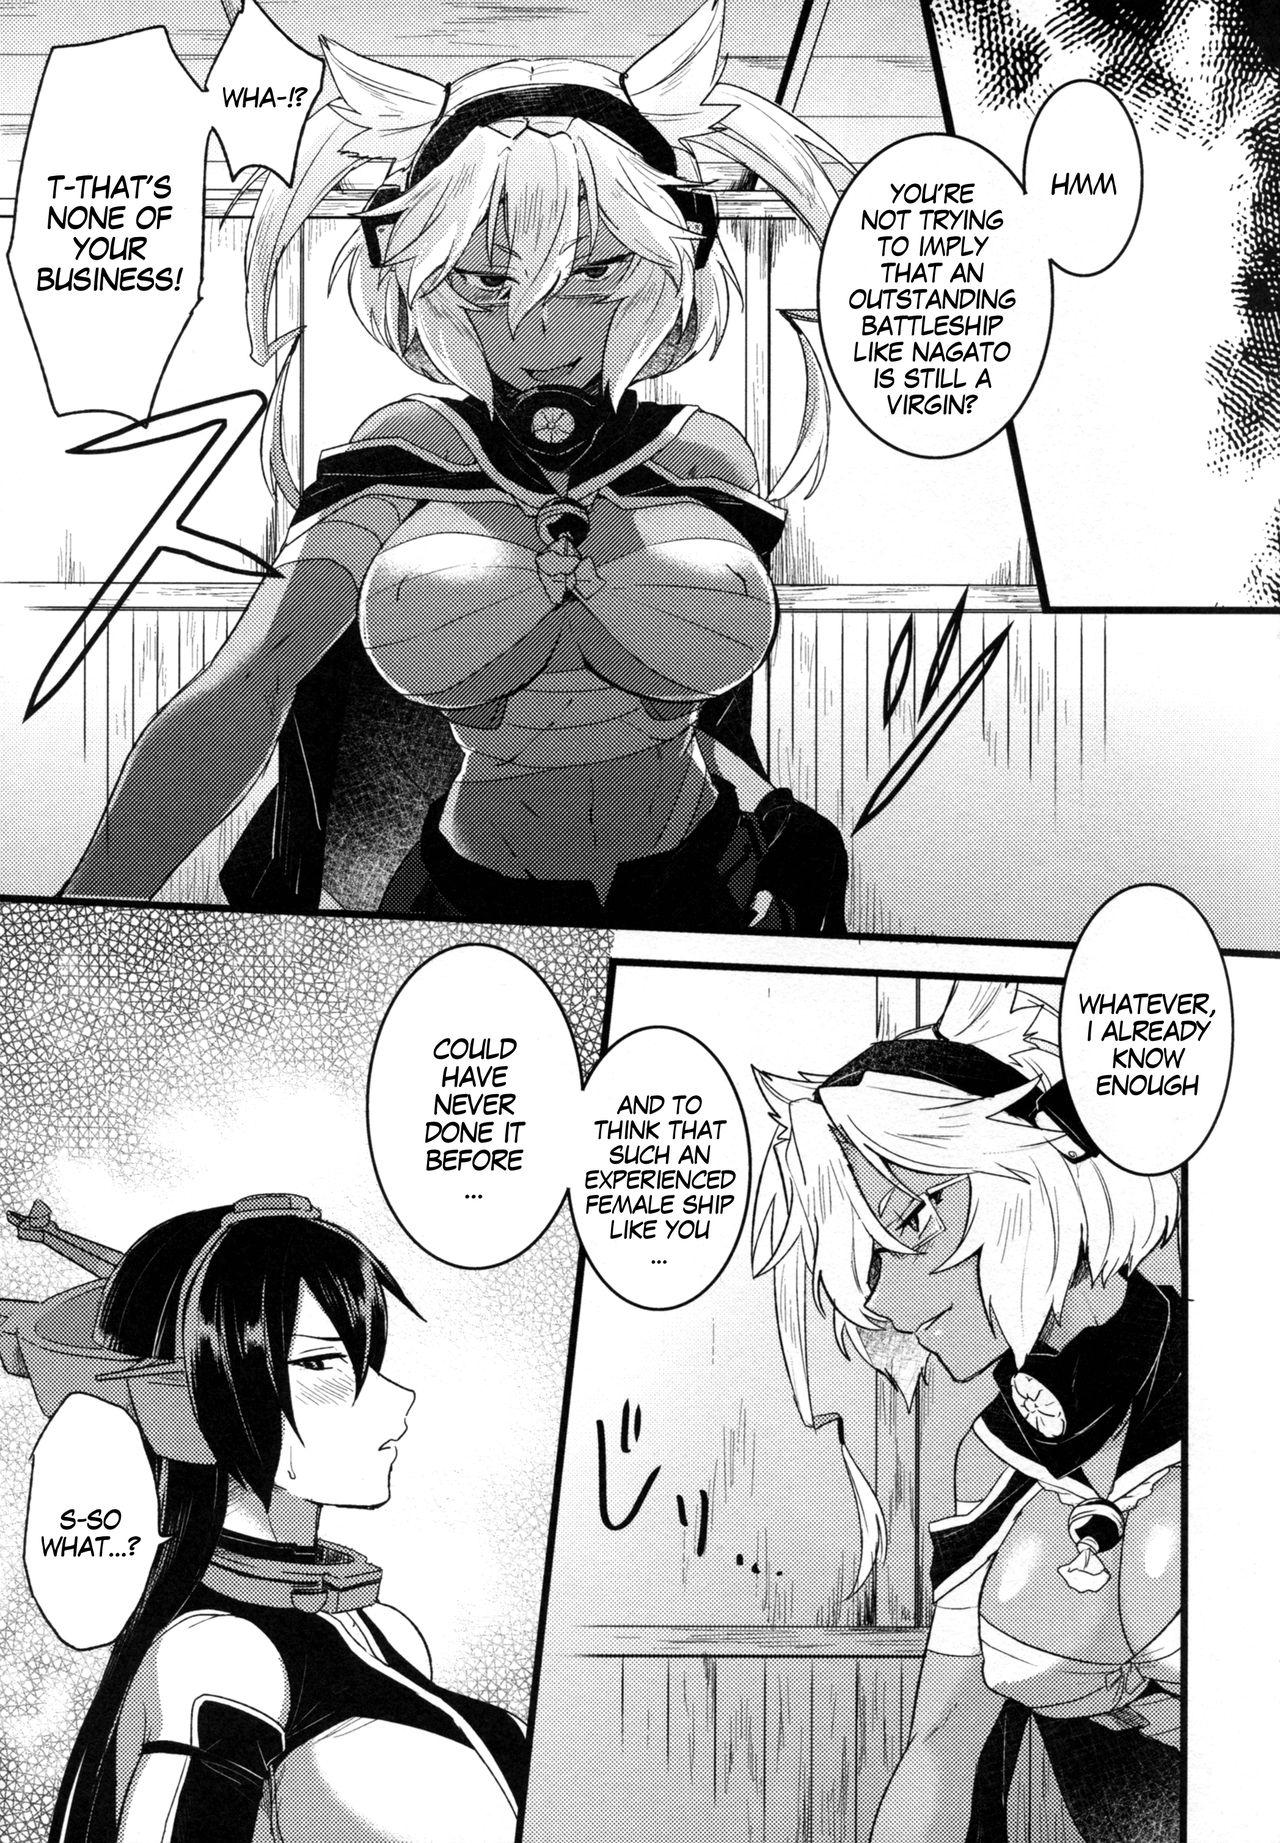 Perfect Tits Musashi x Nagato Anthology "Beast Emotion" Ch. 1 - Kantai collection Exhibitionist - Page 11